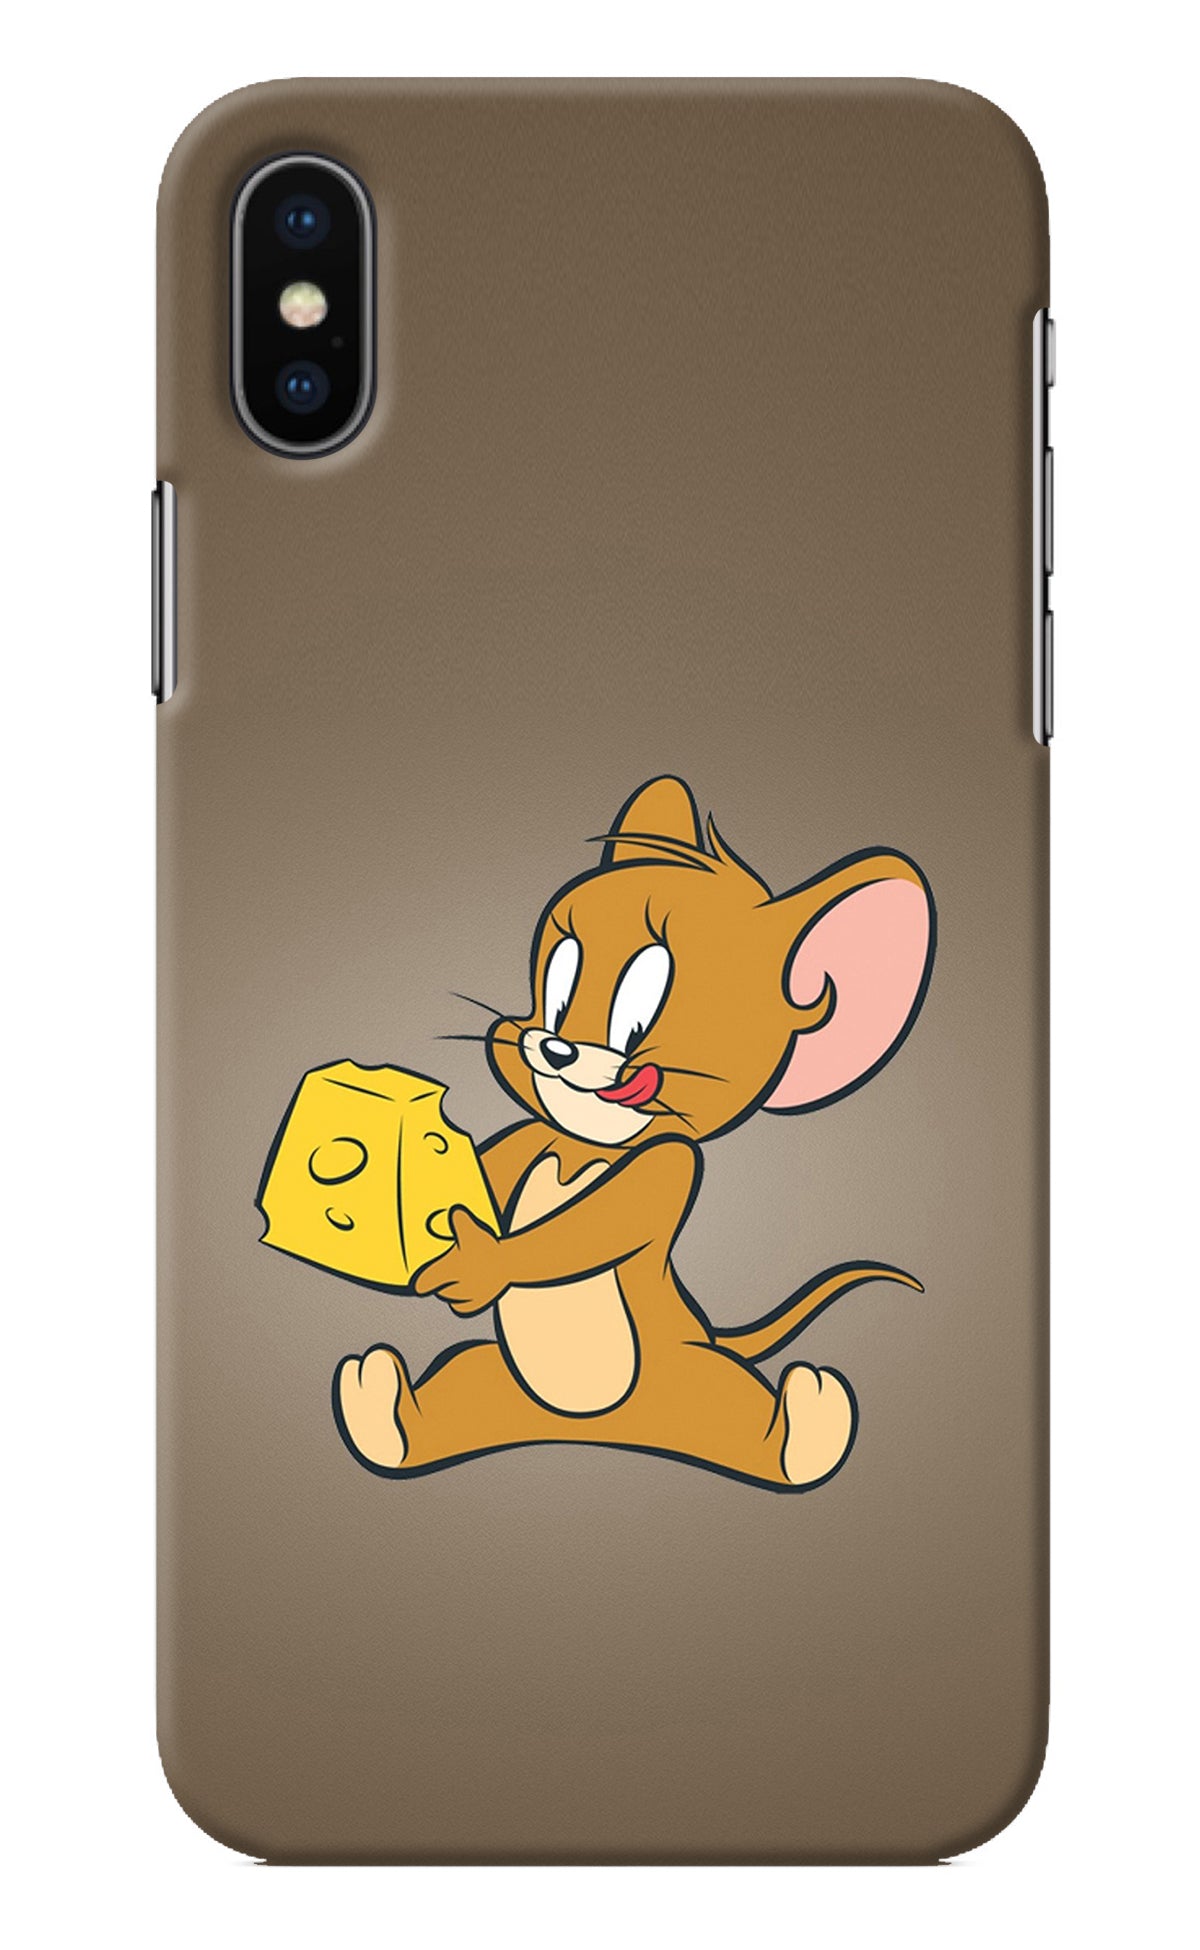 Jerry iPhone X Back Cover